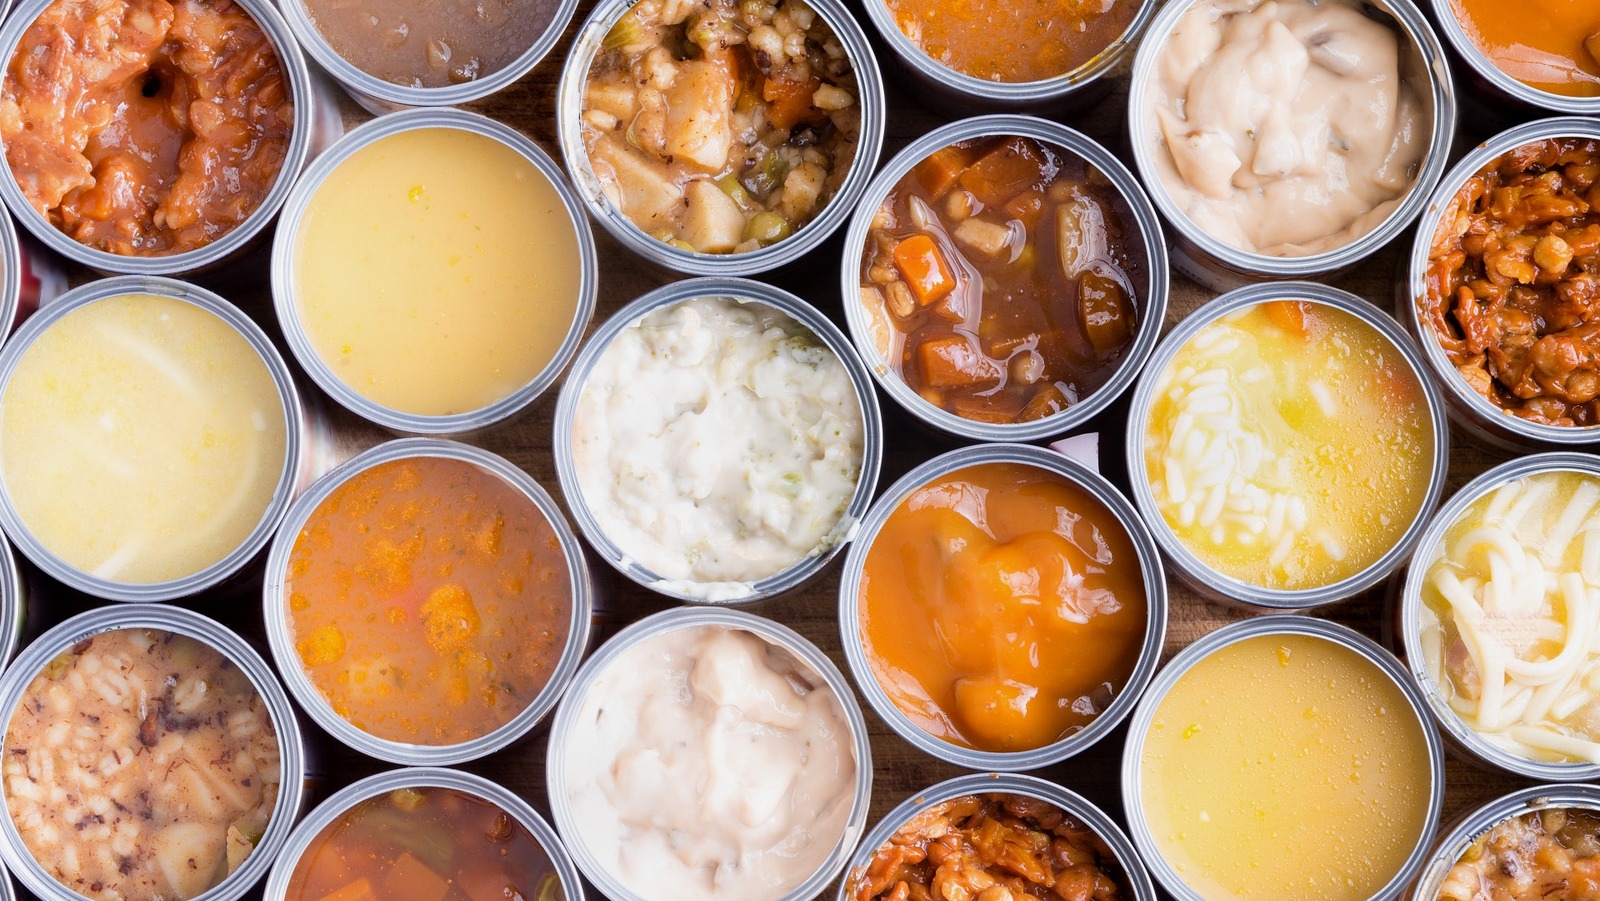 Why Is Canned Soup So Salty?